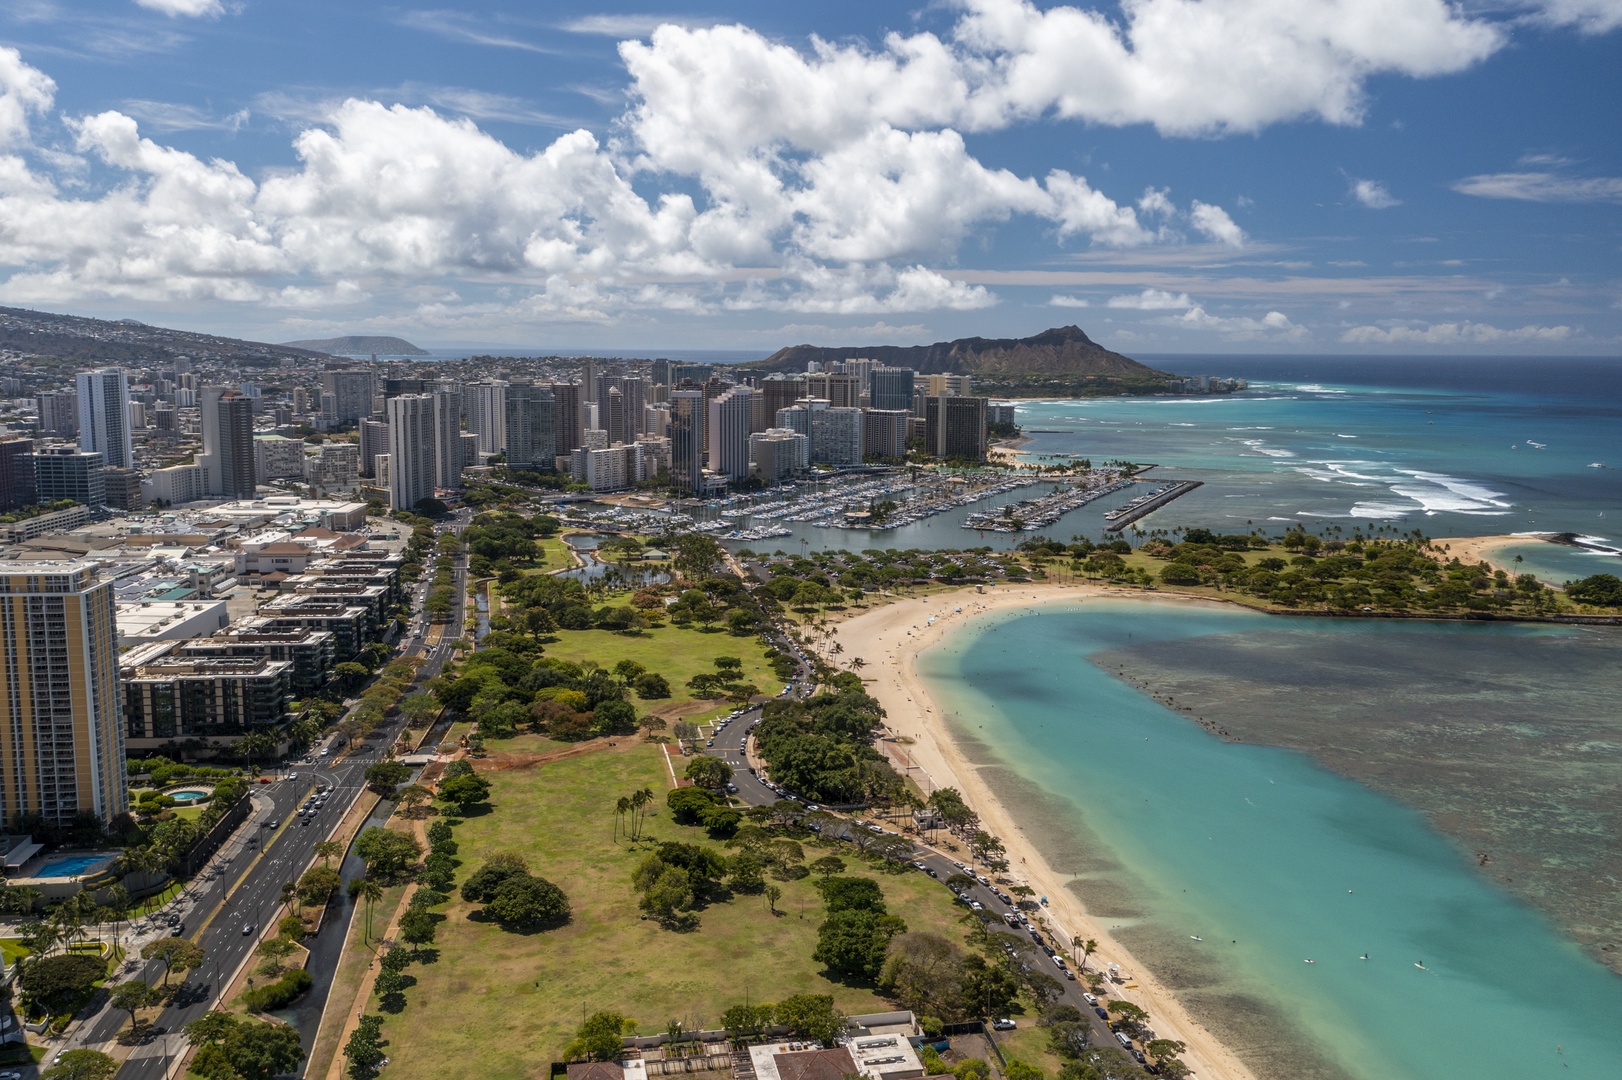 Honolulu Vacation Rentals, Park Lane Sky Resort - This condo offers a premier location to experience the best of Honolulu